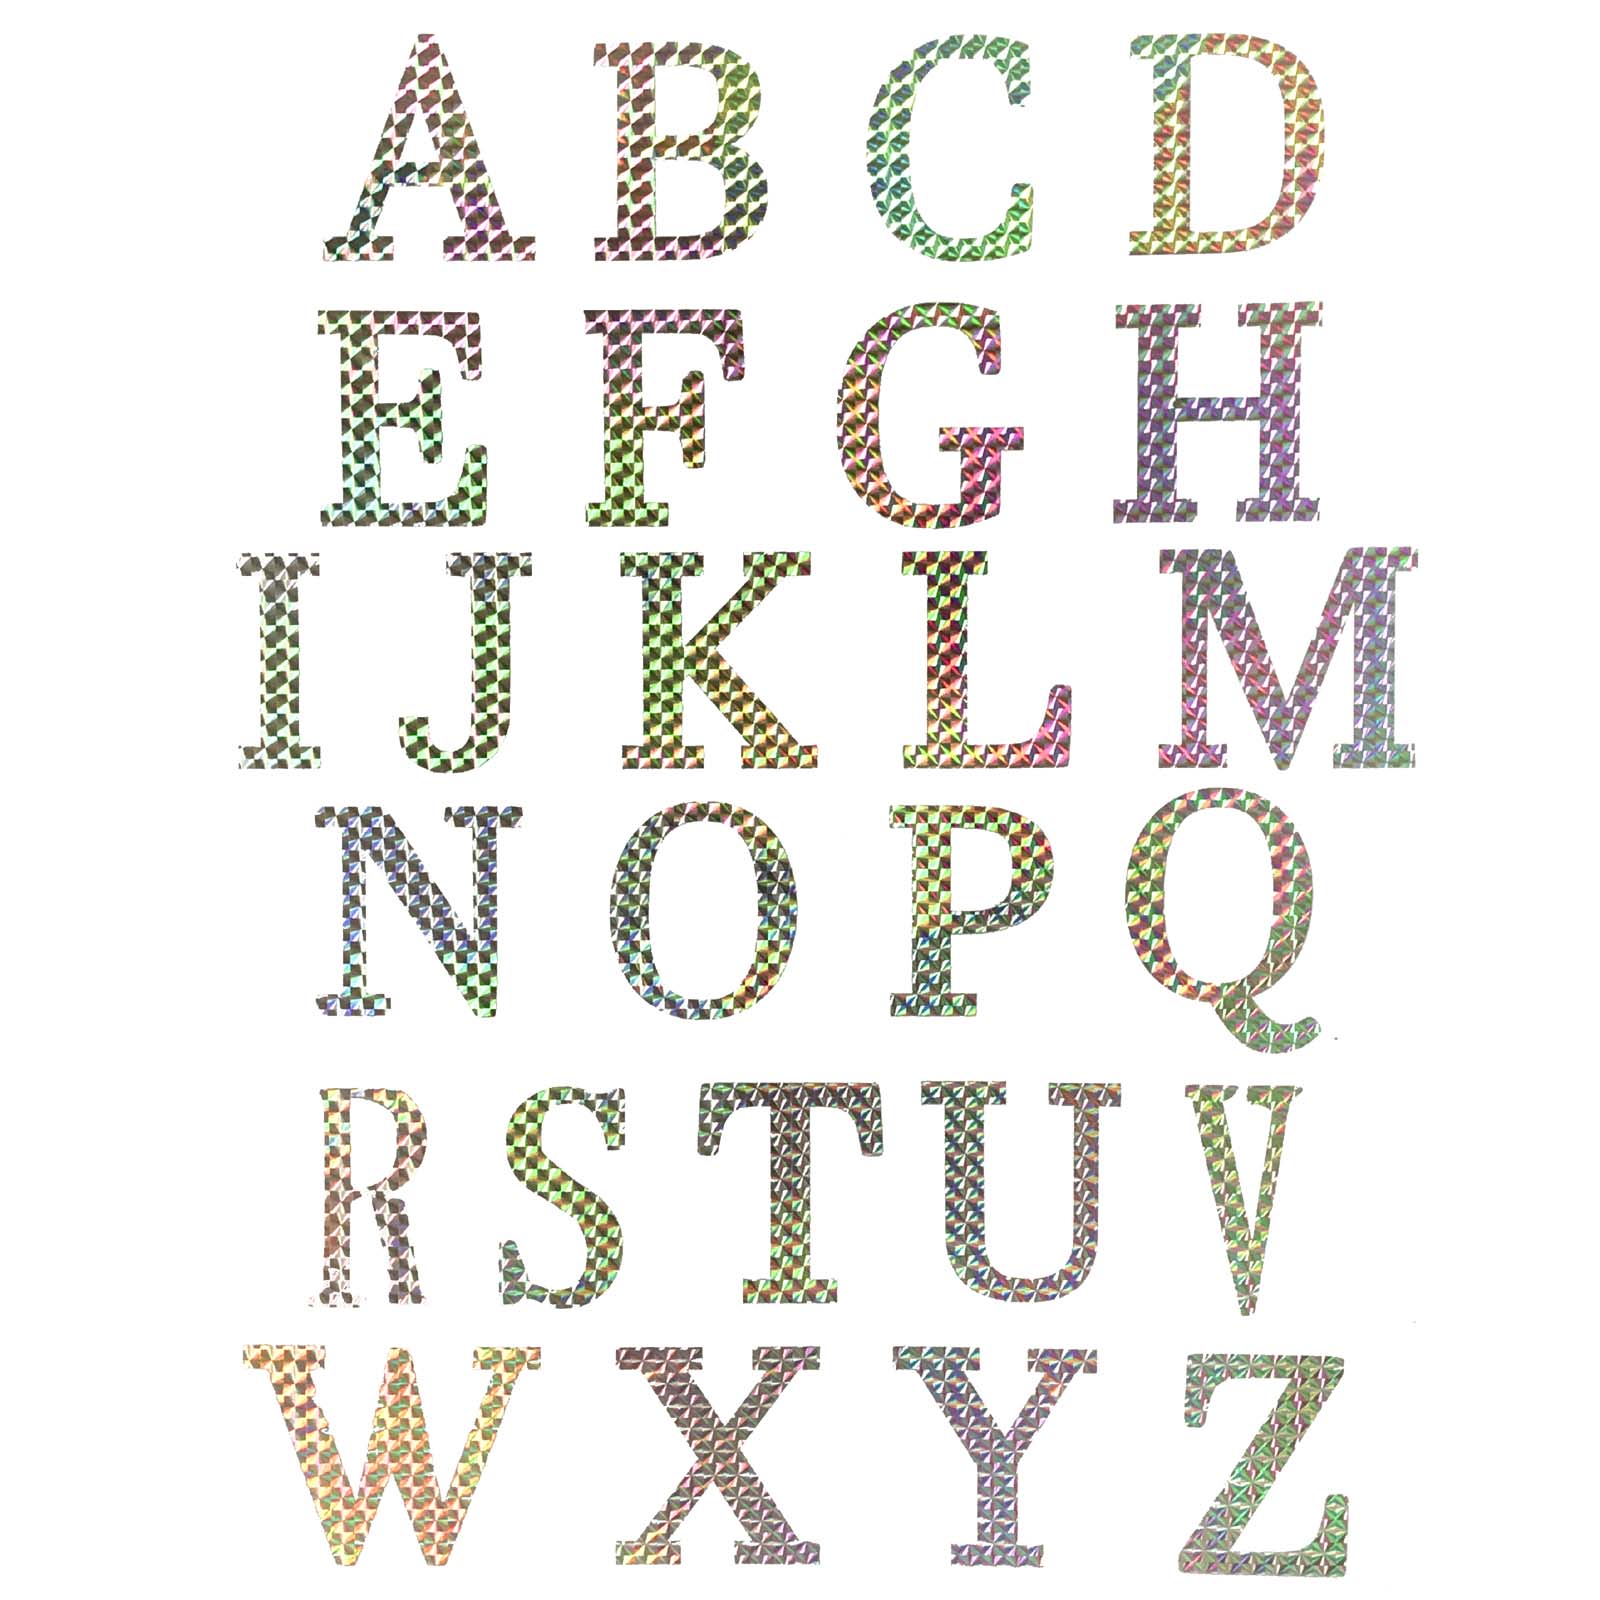 Replica CUSTOM Font / Style Holographic Letters - Your Initials!